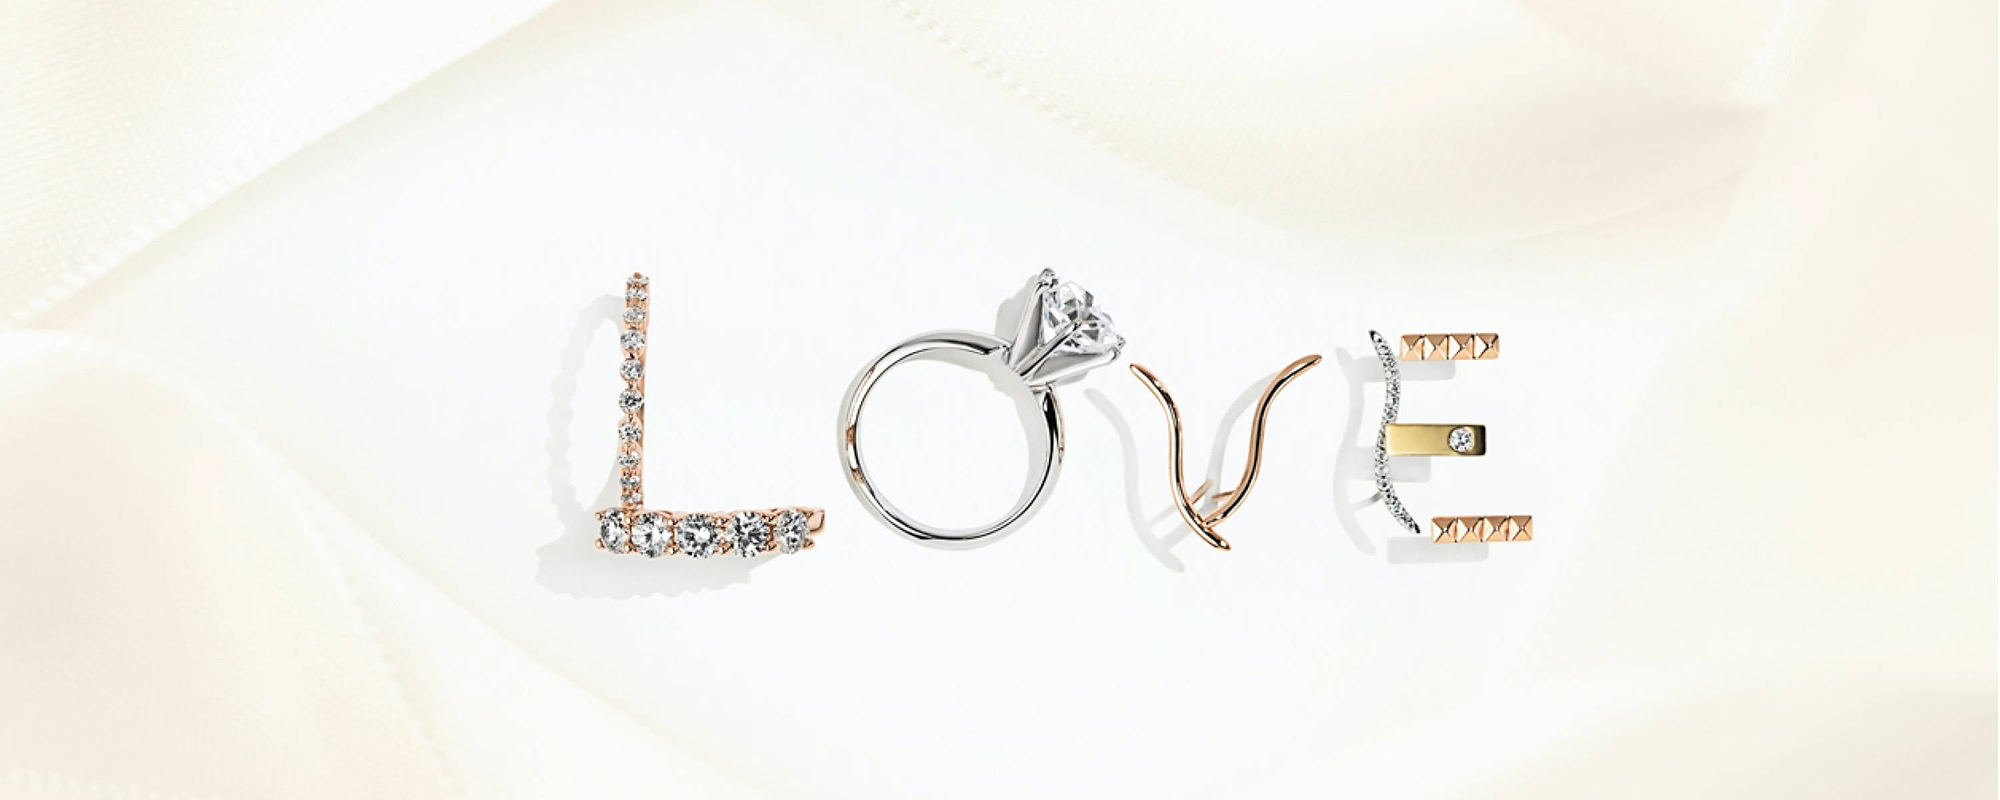 Valentine's Day Jewelry Gift Ideas: Top 10 Gift Guide